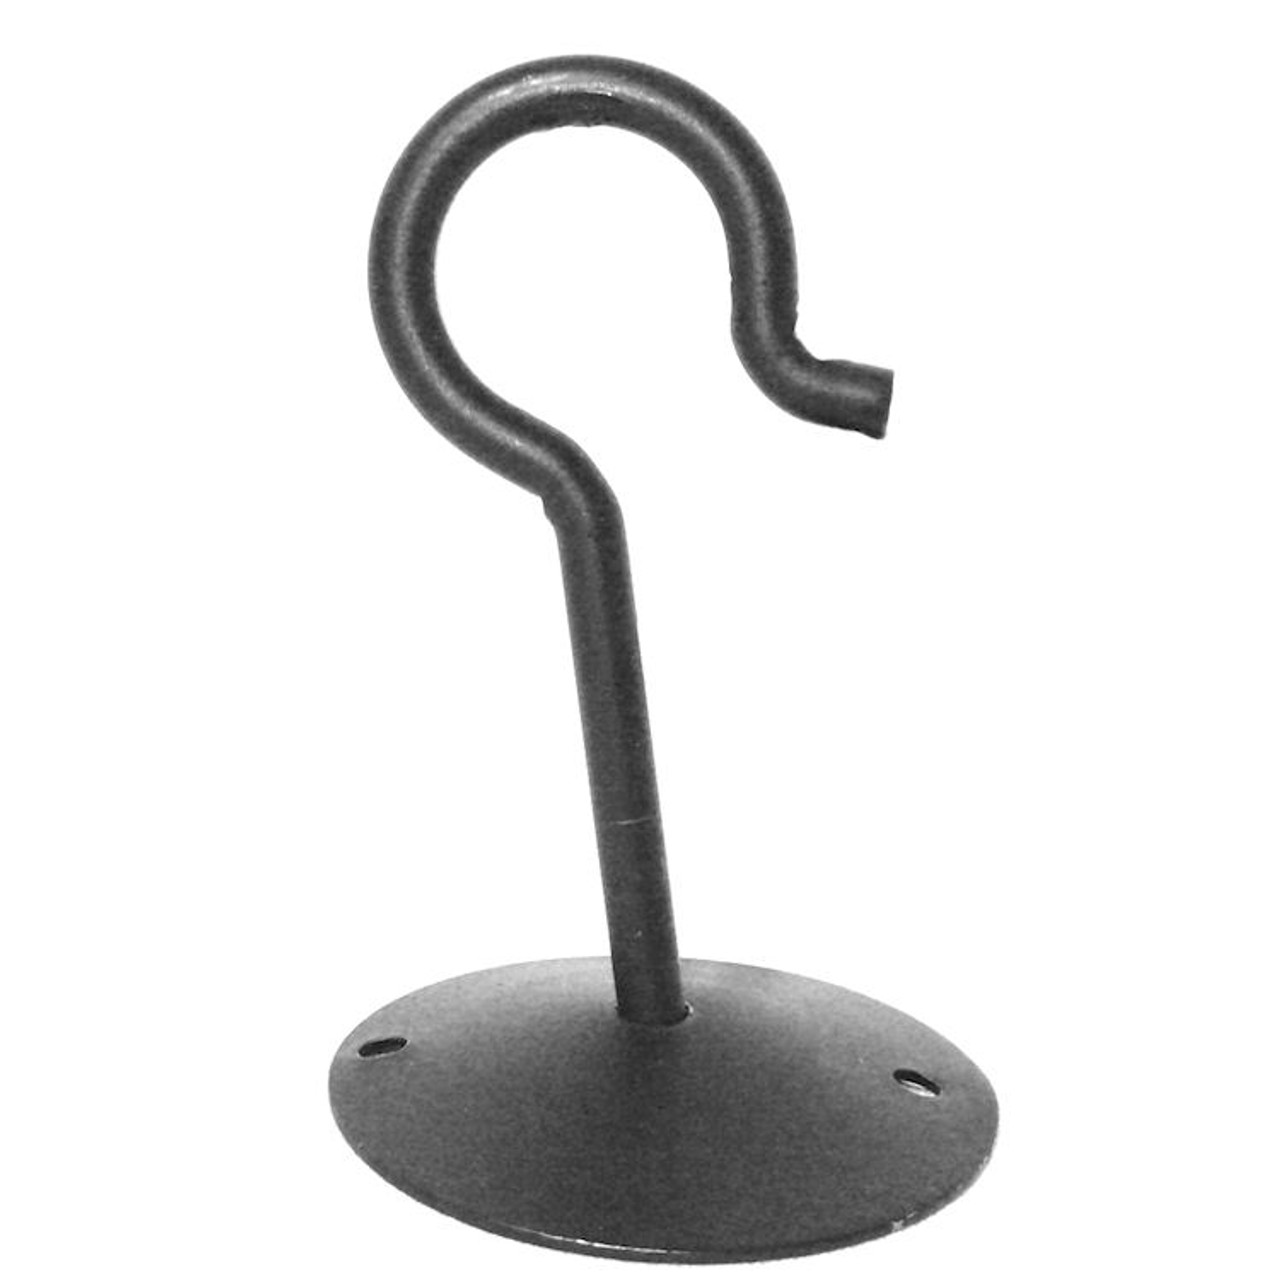 https://cdn11.bigcommerce.com/s-t9h6v/images/stencil/1280x1280/products/2722/8115/amish_iron_ceiling_hook_42290__38161.1558804452.jpg?c=2